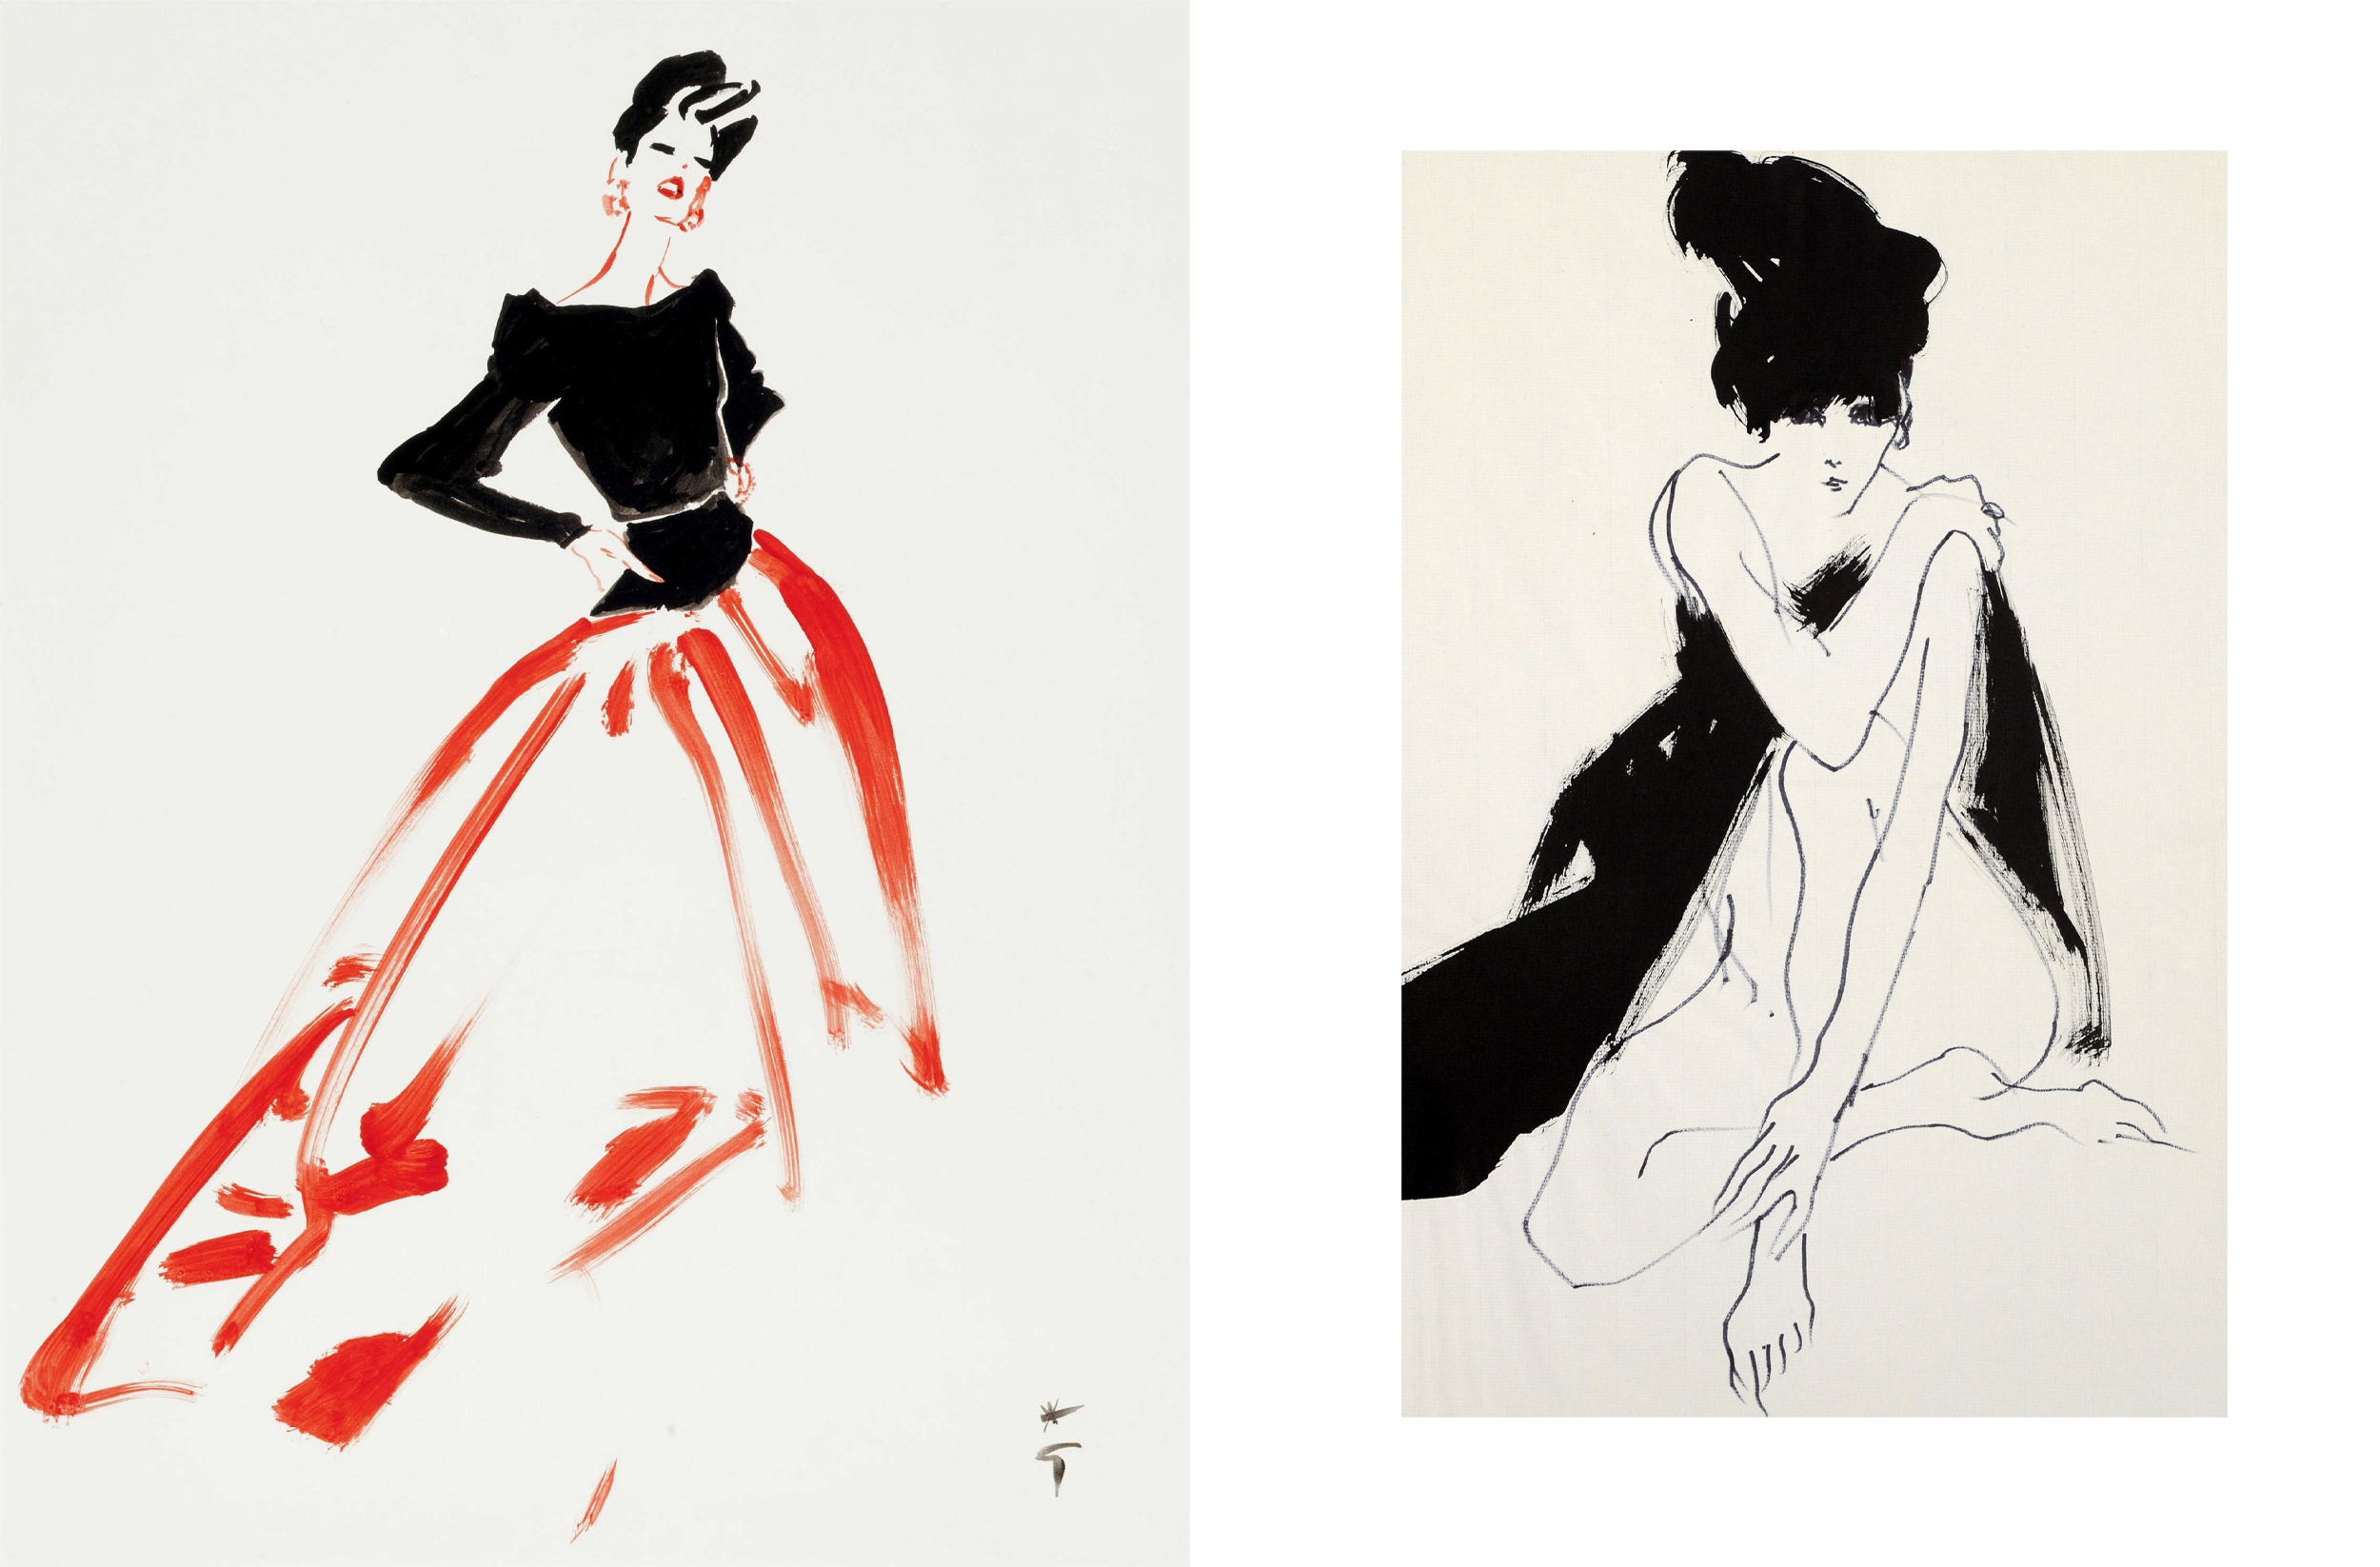 Drawing Chanel - The Fashion Illustrators from 1915 through the